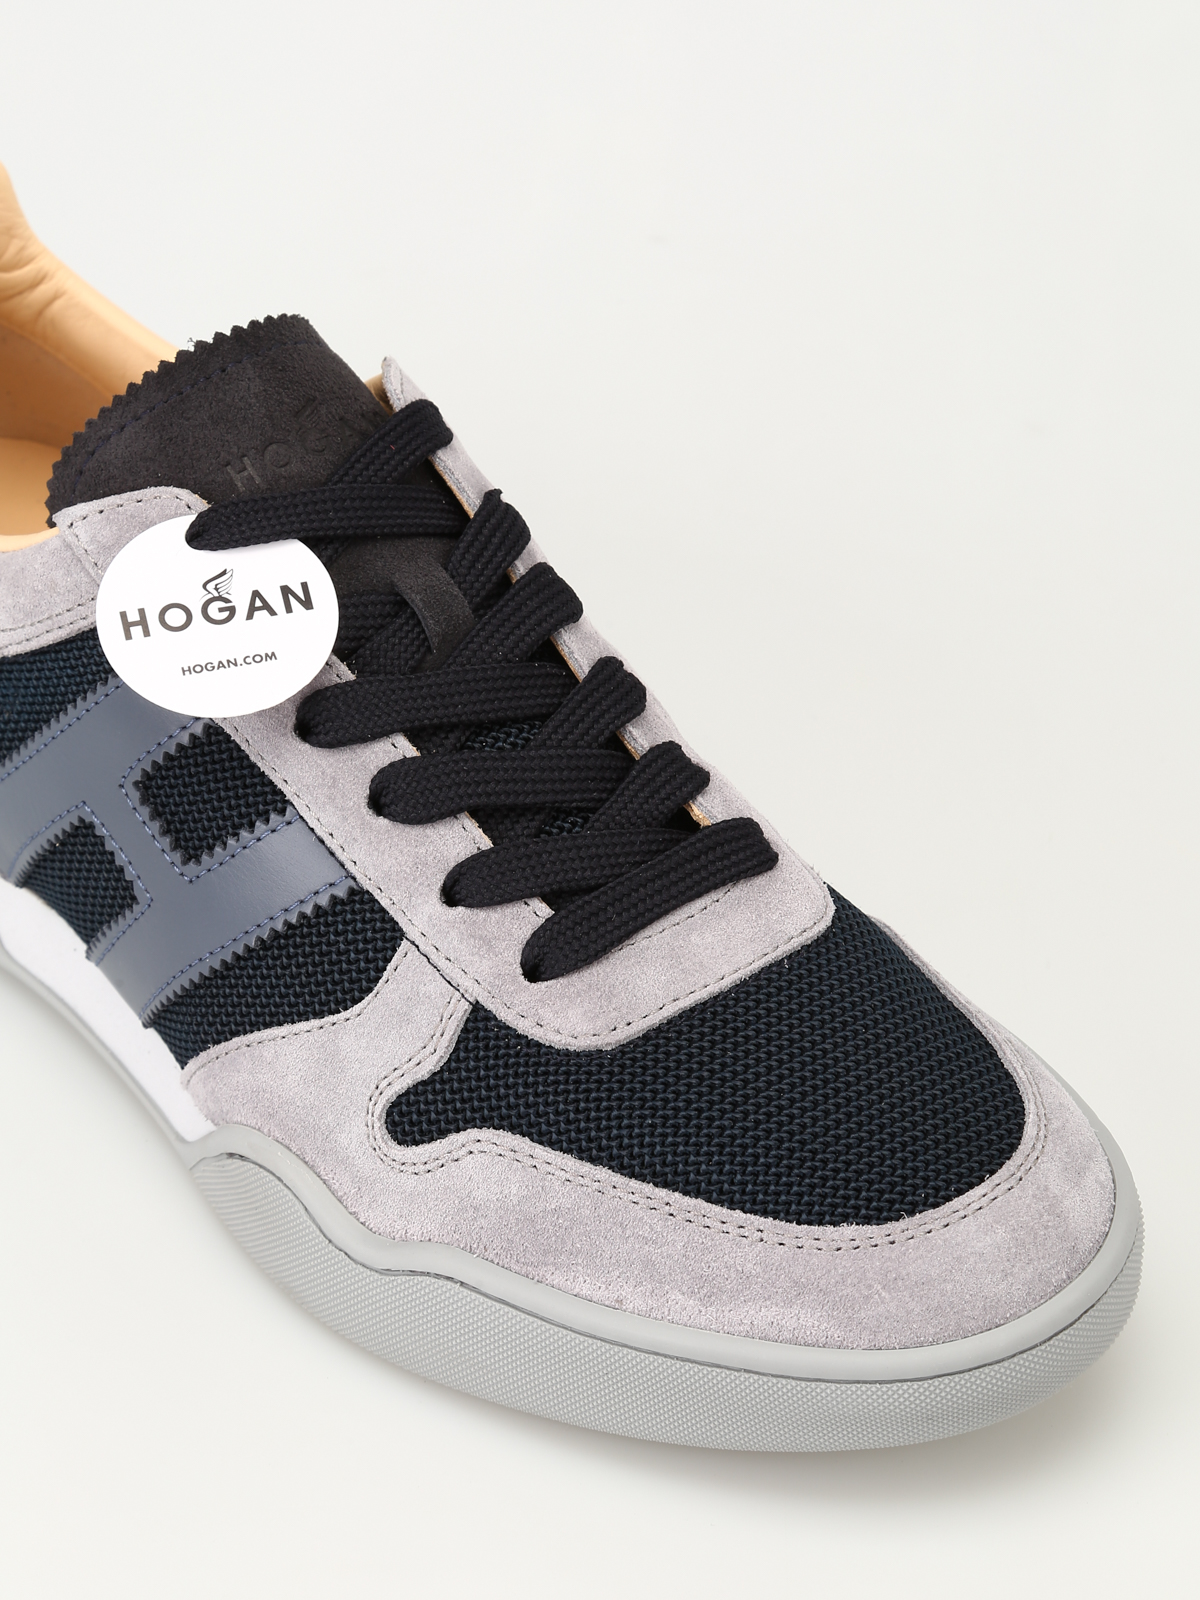 Hogan Suede Sneakers H357 in Blue,Grey,Beige Womens Mens Shoes Mens Trainers Low-top trainers Blue 